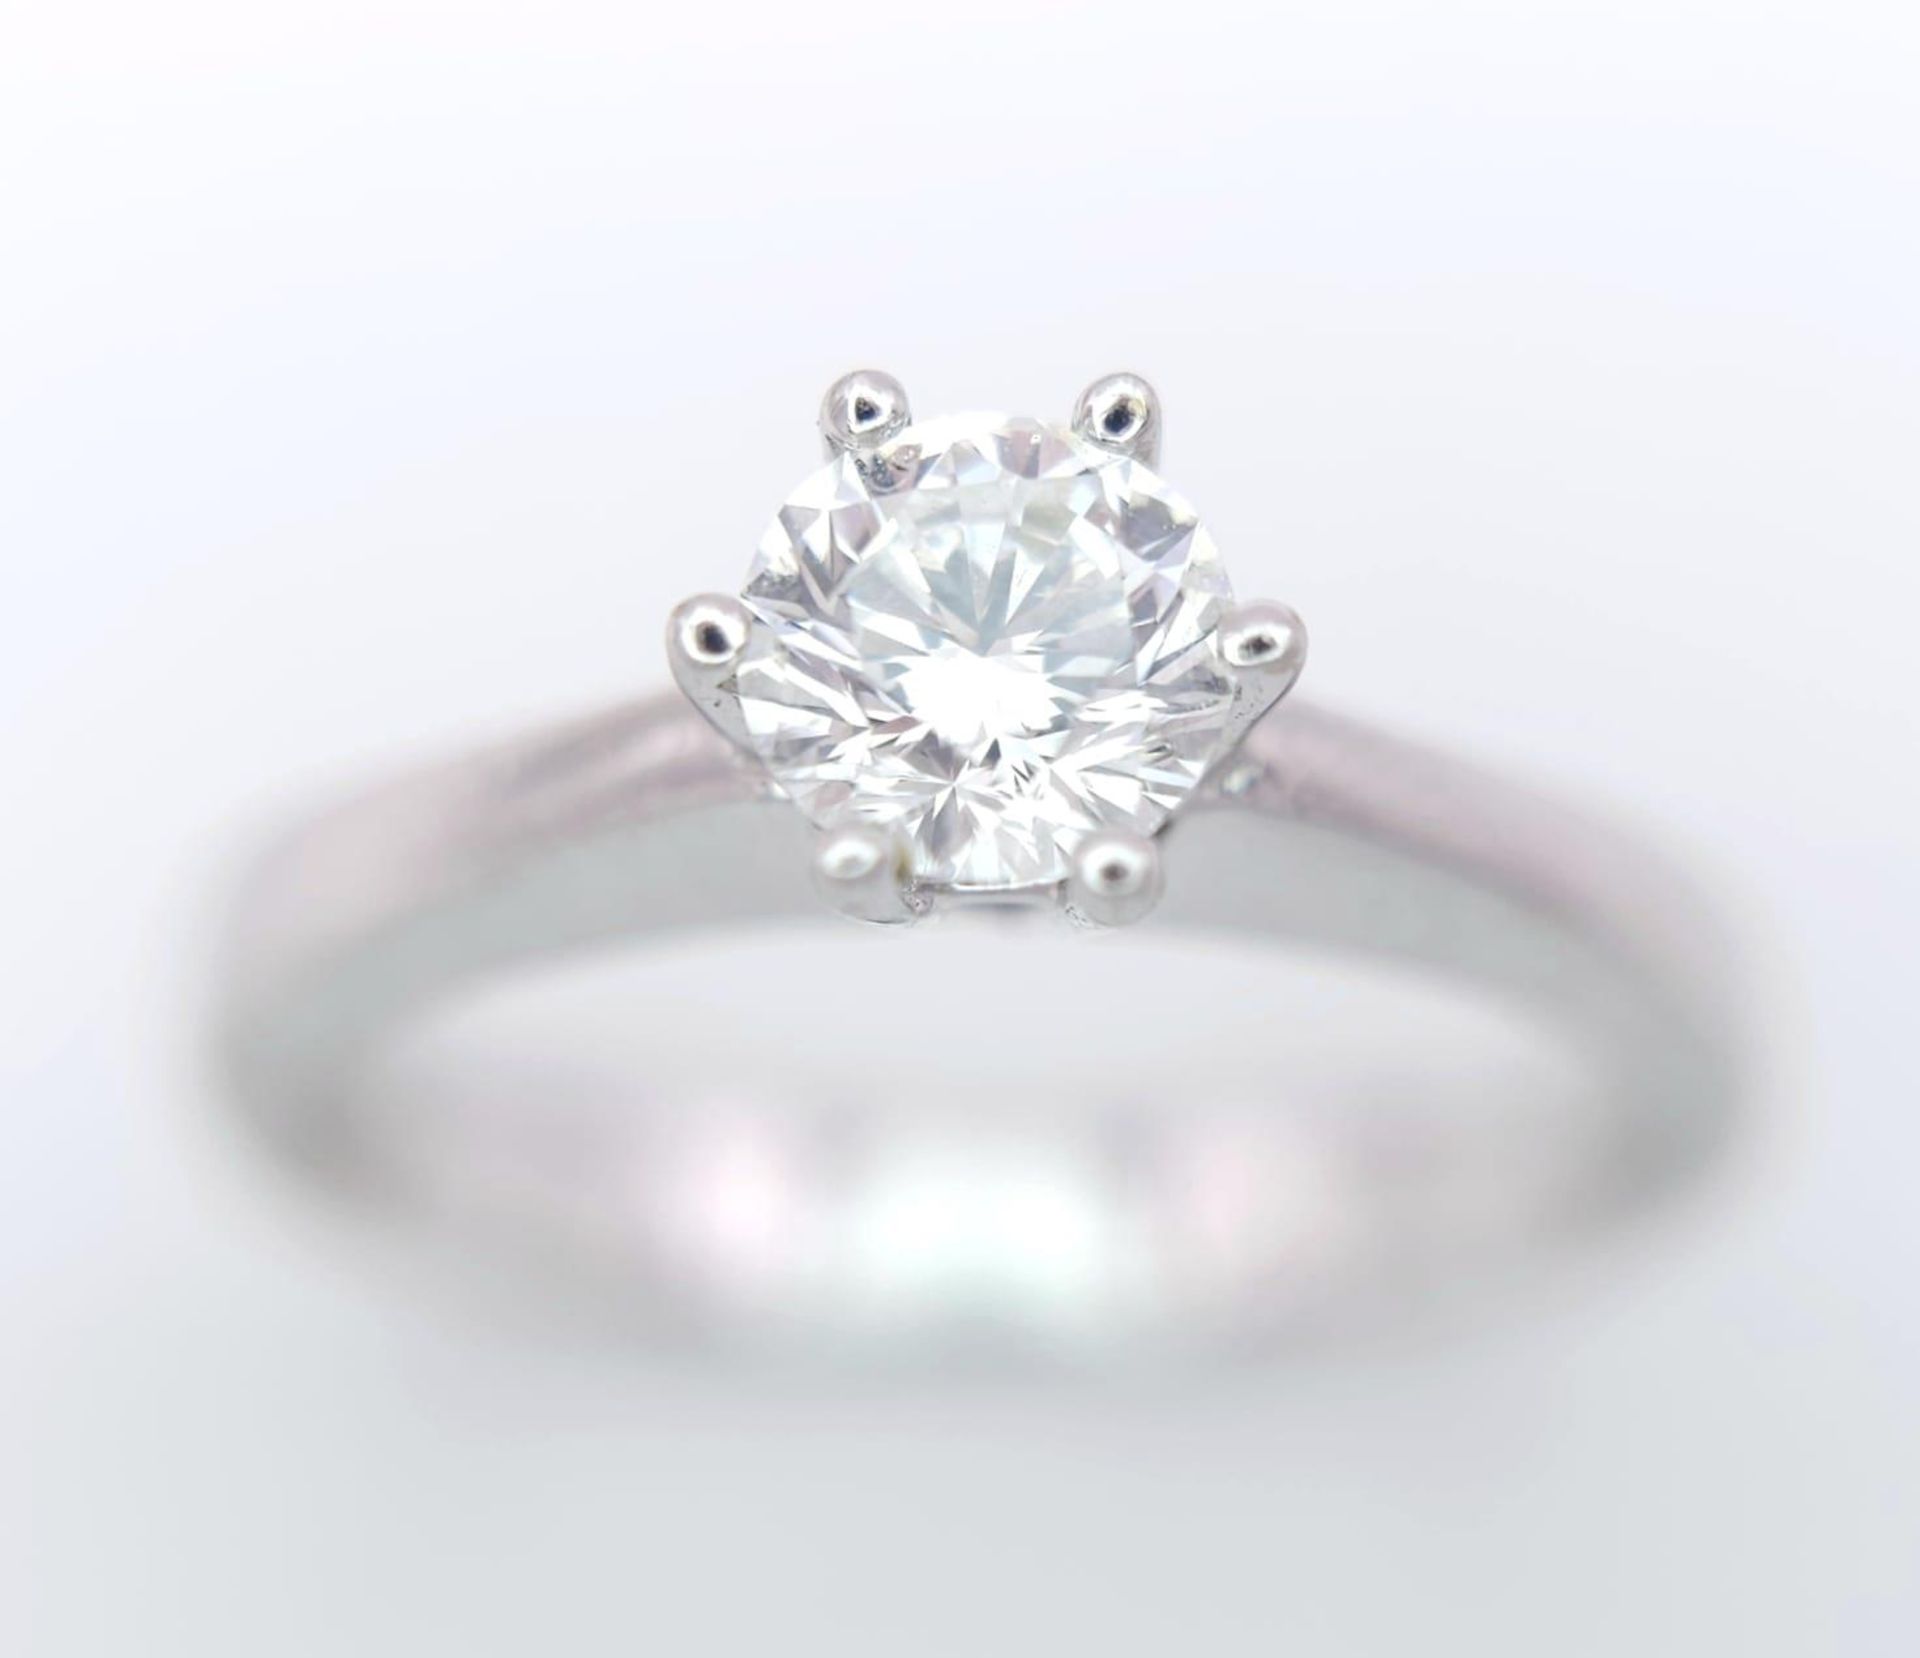 AN 18K WHITE GOLD DIAMOND SOLITAIRE RING - 0.50CT. 6 CLAW SETTING. 3.9G. SIZE N